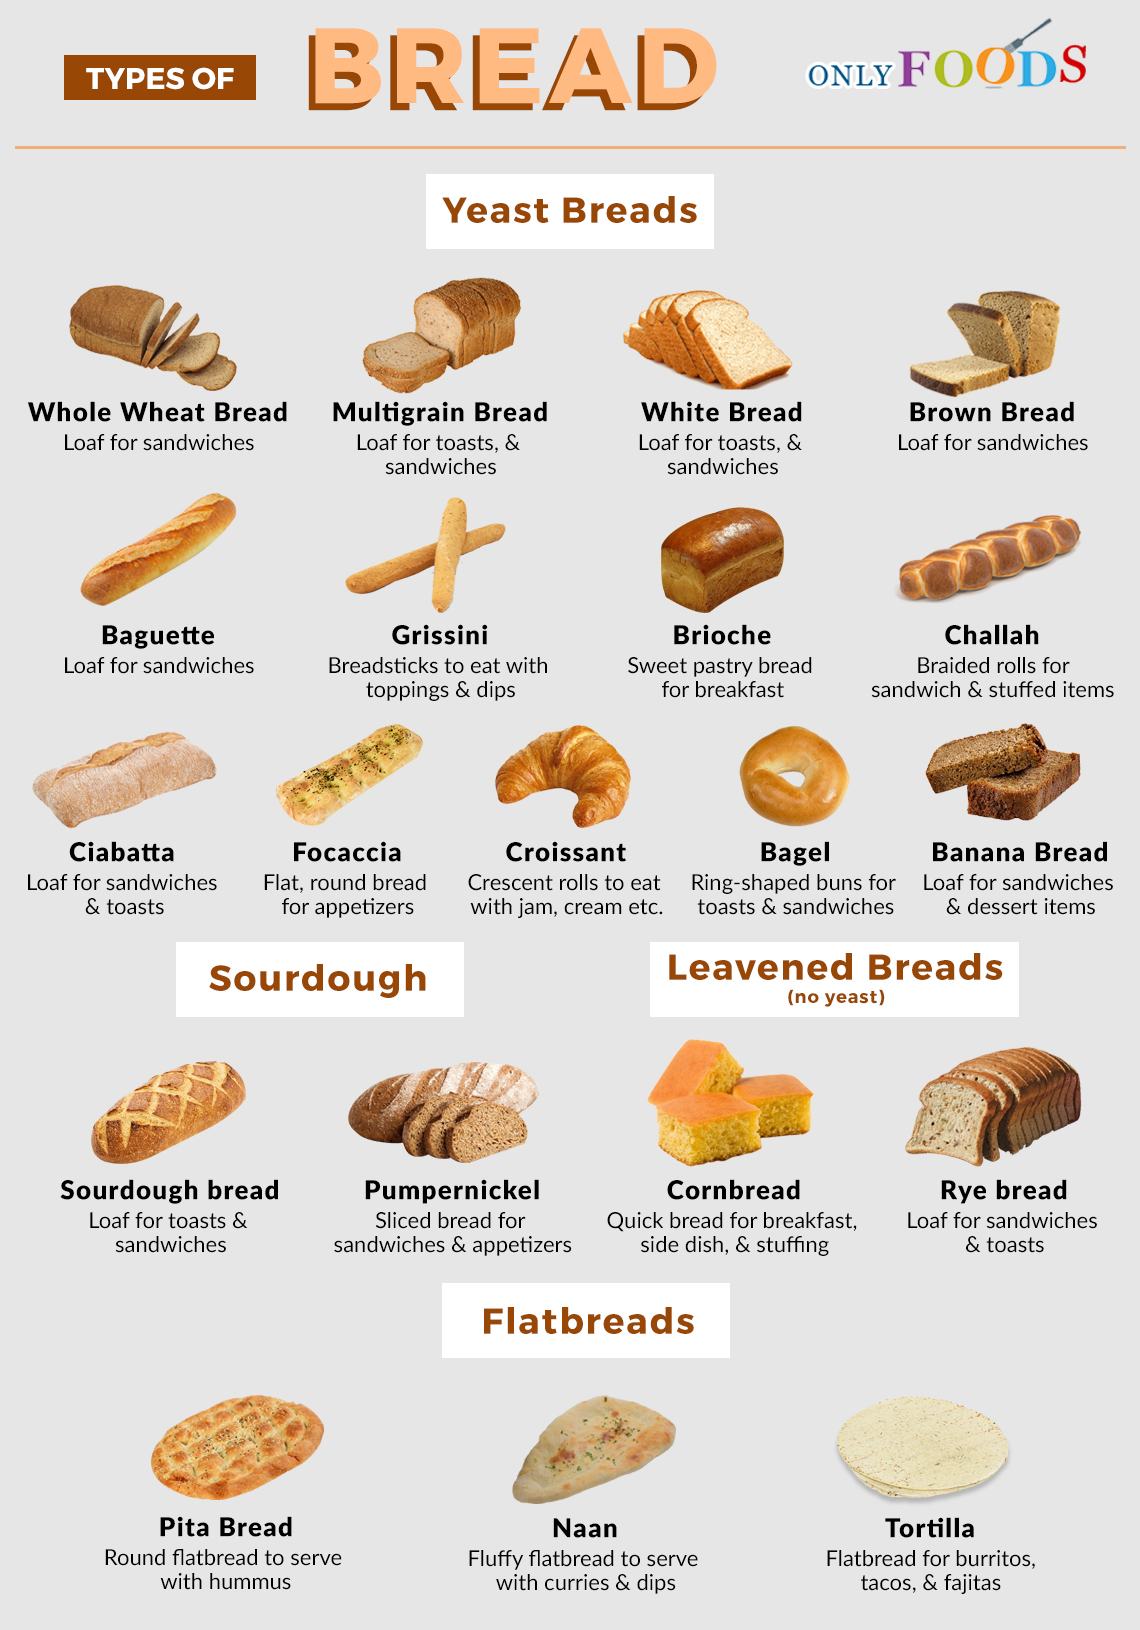 20 of the Most Popular Types of Breads